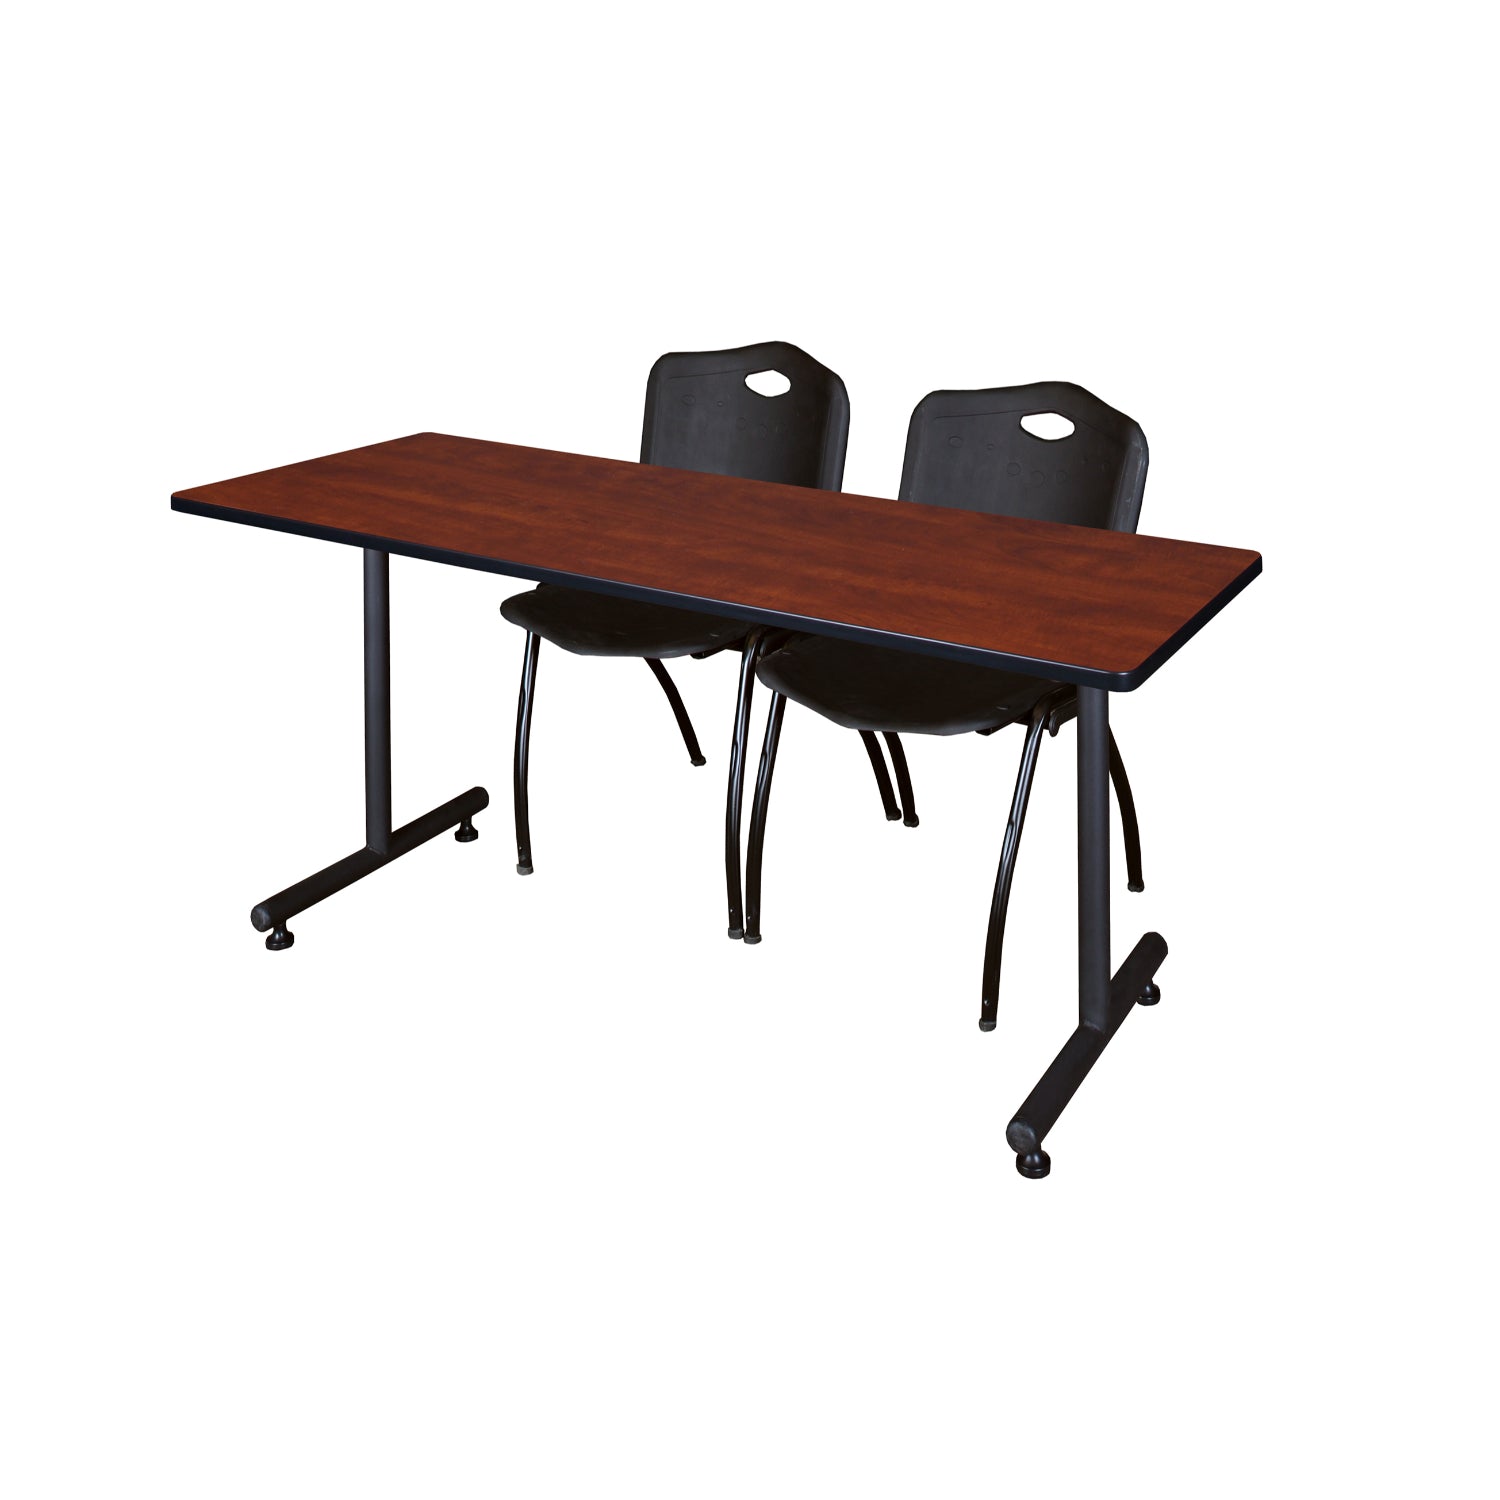 Kobe Training Table and Chair Package, Kobe 60" x 24" T-Base Training/Seminar Table with 2 "M" Stack Chairs